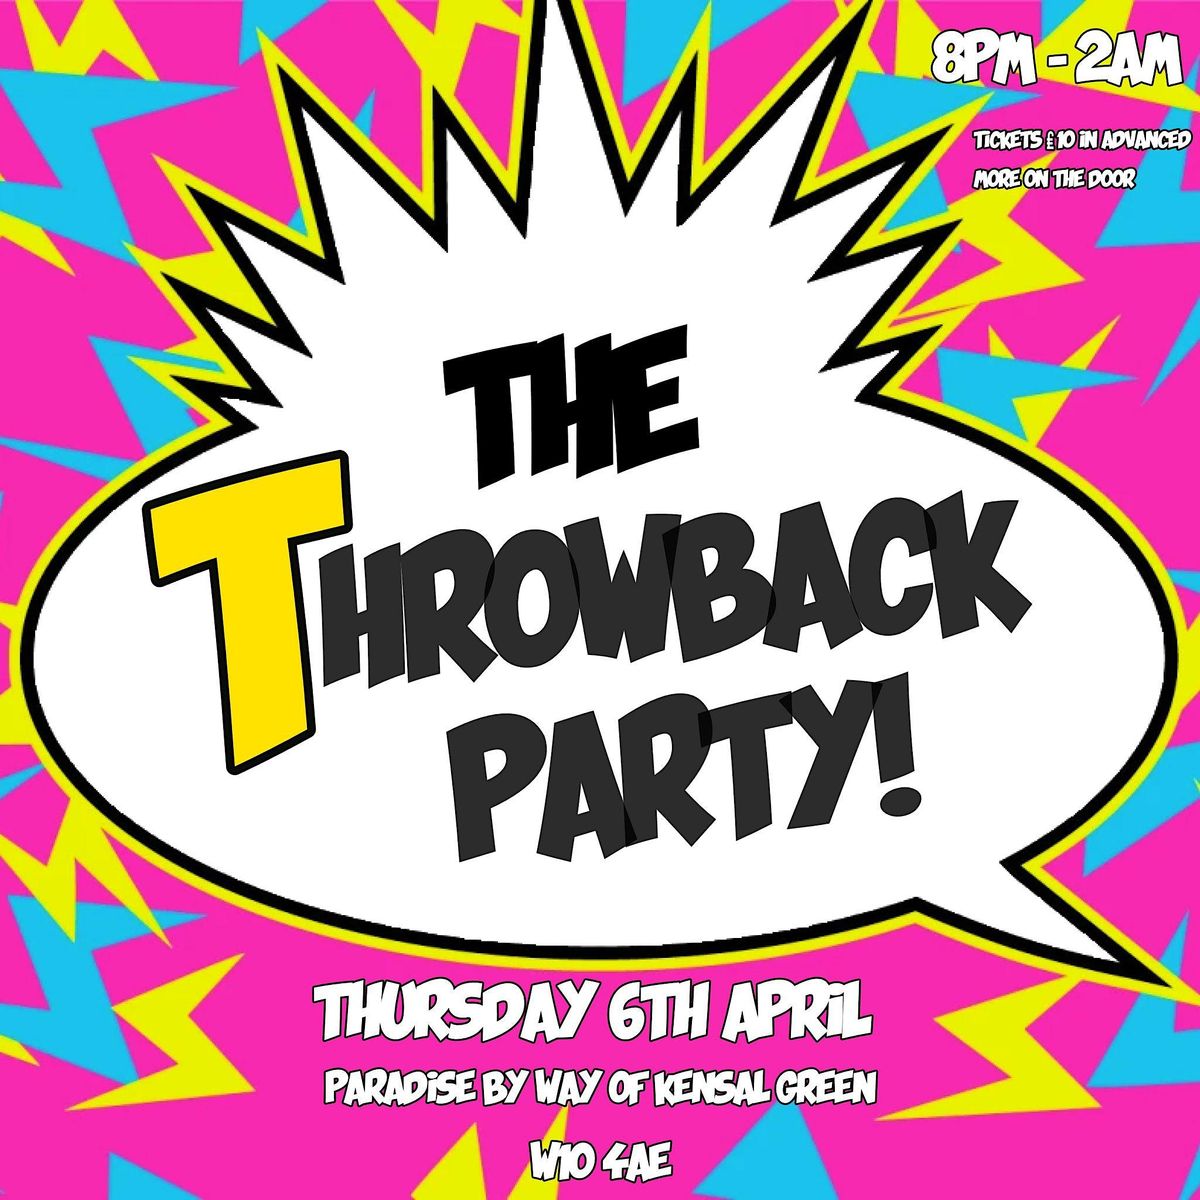 THE THROWBACK PARTY